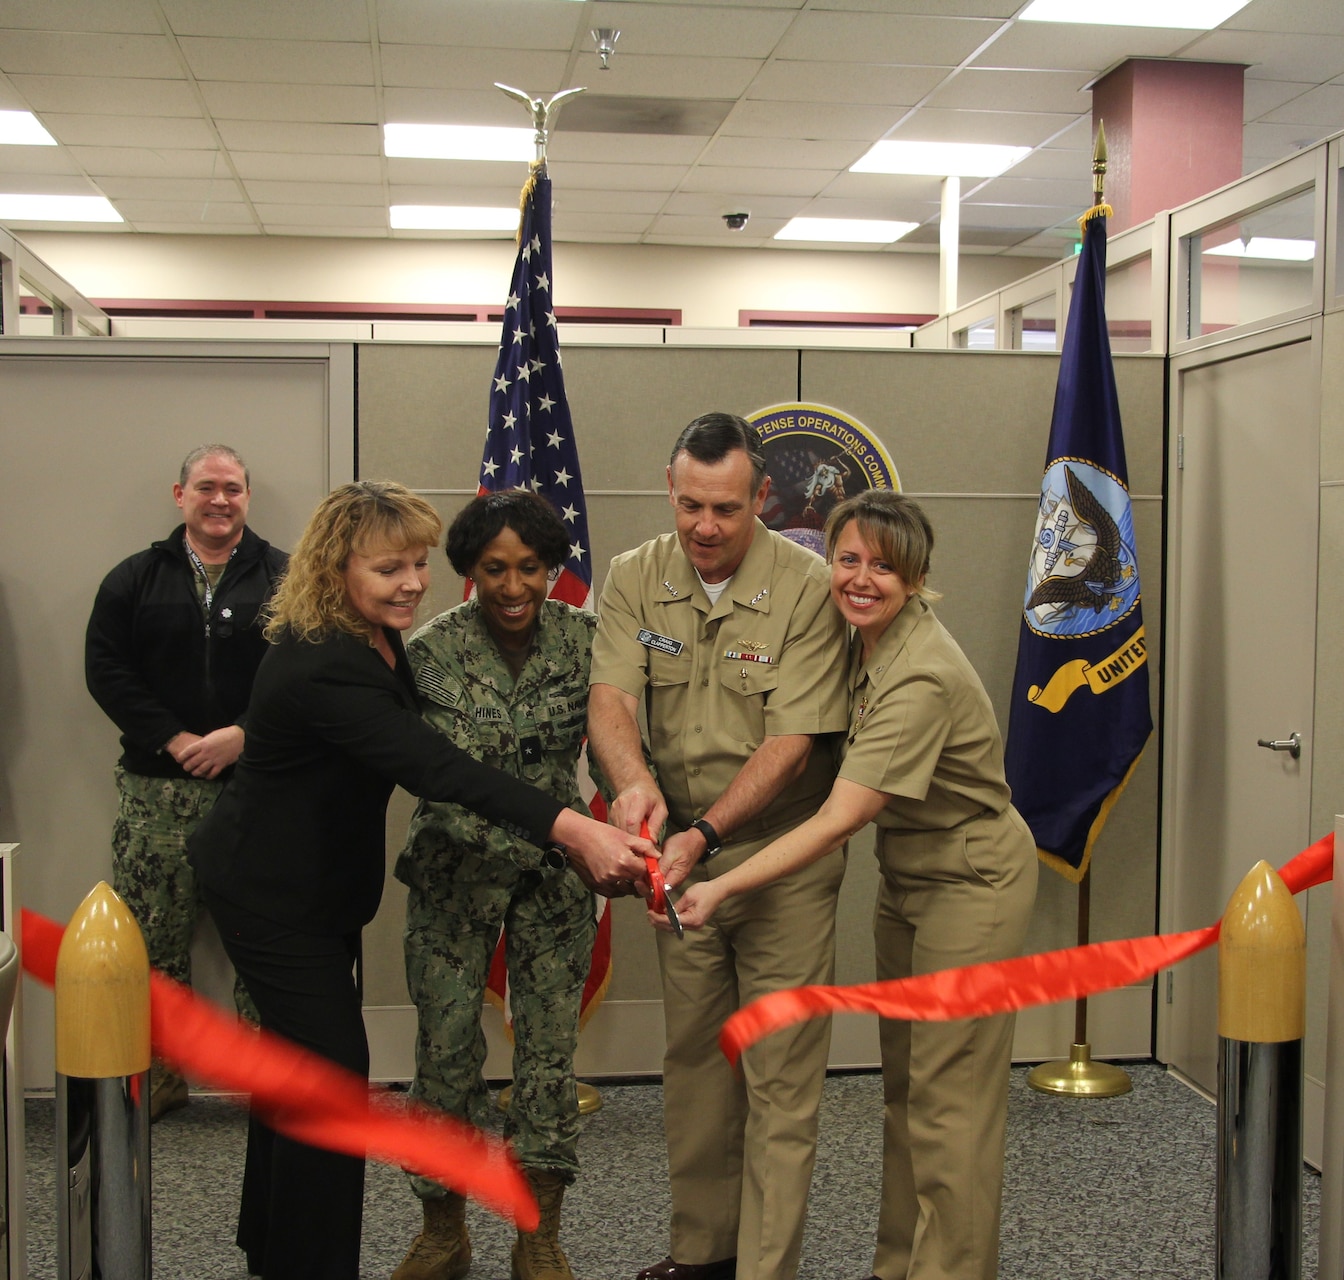 From left, Ms. Tami North, Director of Information Warfare Readiness, Naval Information Forces; Rear Adm. Tracy Hines, Navy Cyber Security Division Director, Office of the Chief of Naval Operations; Vice Adm. Craig Clapperton, Commander, Fleet Cyber Command / Commander, 10th Fleet; and
Capt. Christina Hicks, Commanding Officer, Navy Cyber Defense Operations Command, pose for a photo to celebrate the opening of Navy Cyber Defense Operations Command West in San Diego, Calif., Feb. 16, 2023 (Photo by: IT2 Oscar Alejandro).